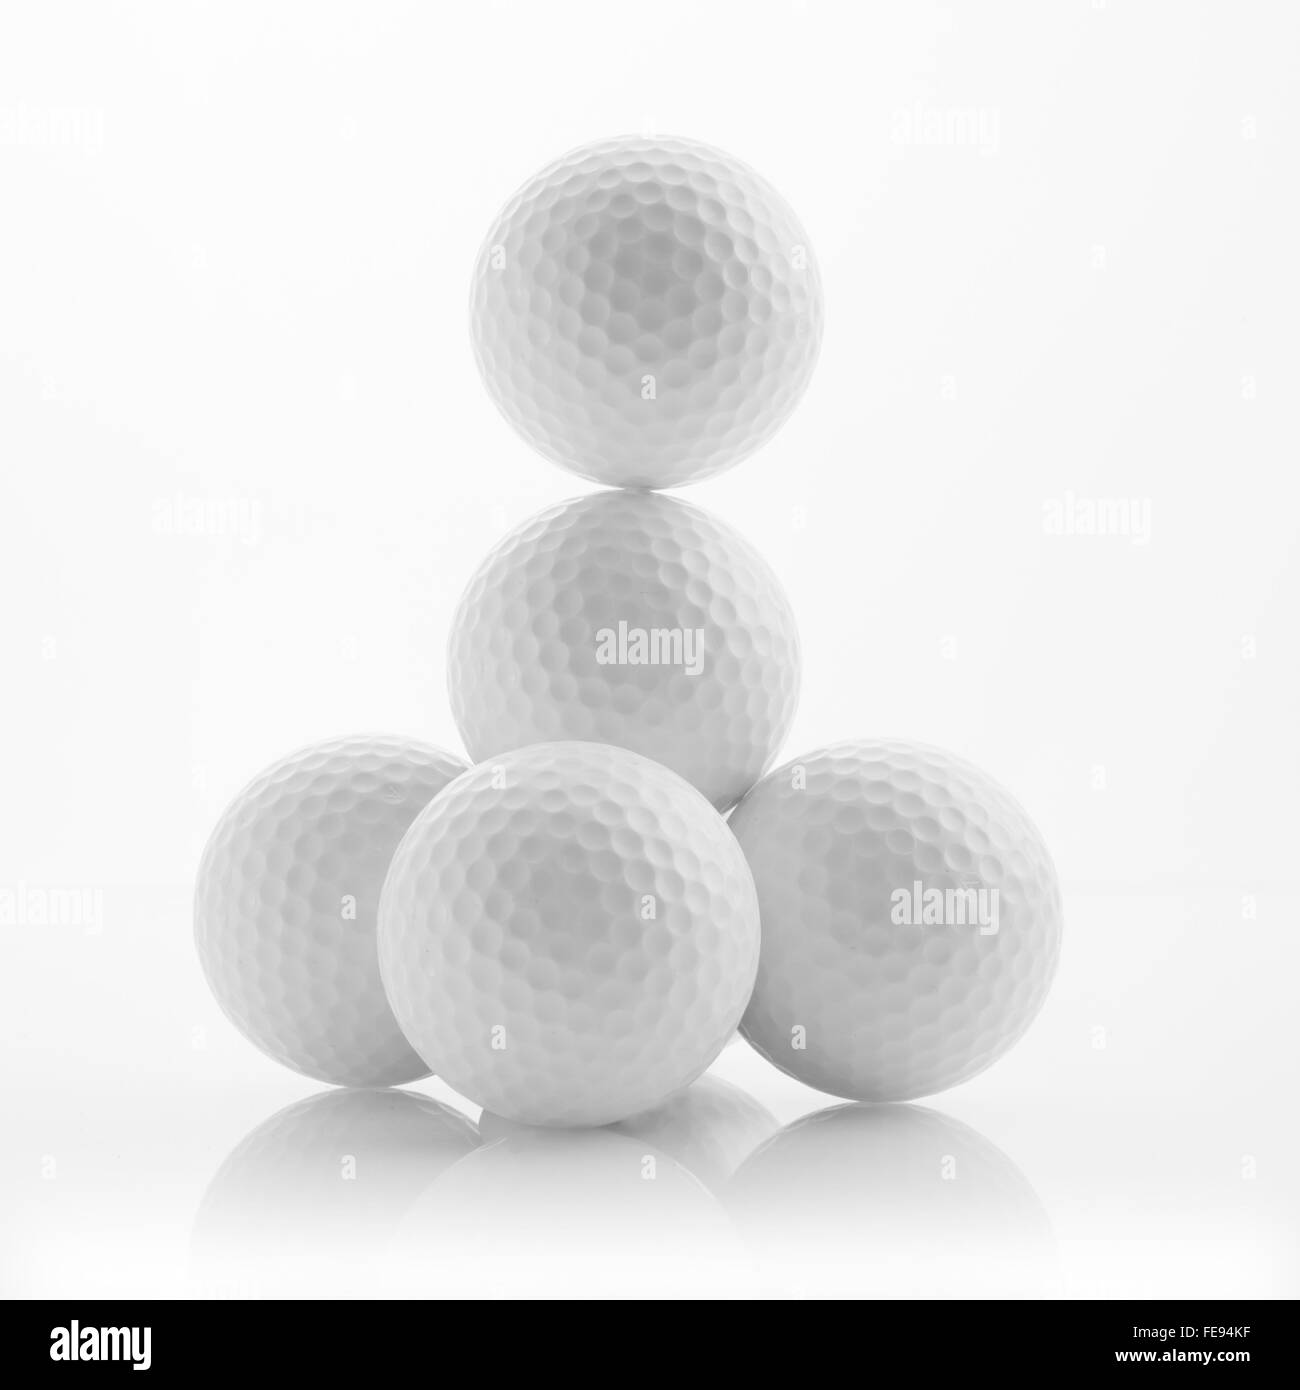 Pile Of Golf Balls on a White Background Stock Photo